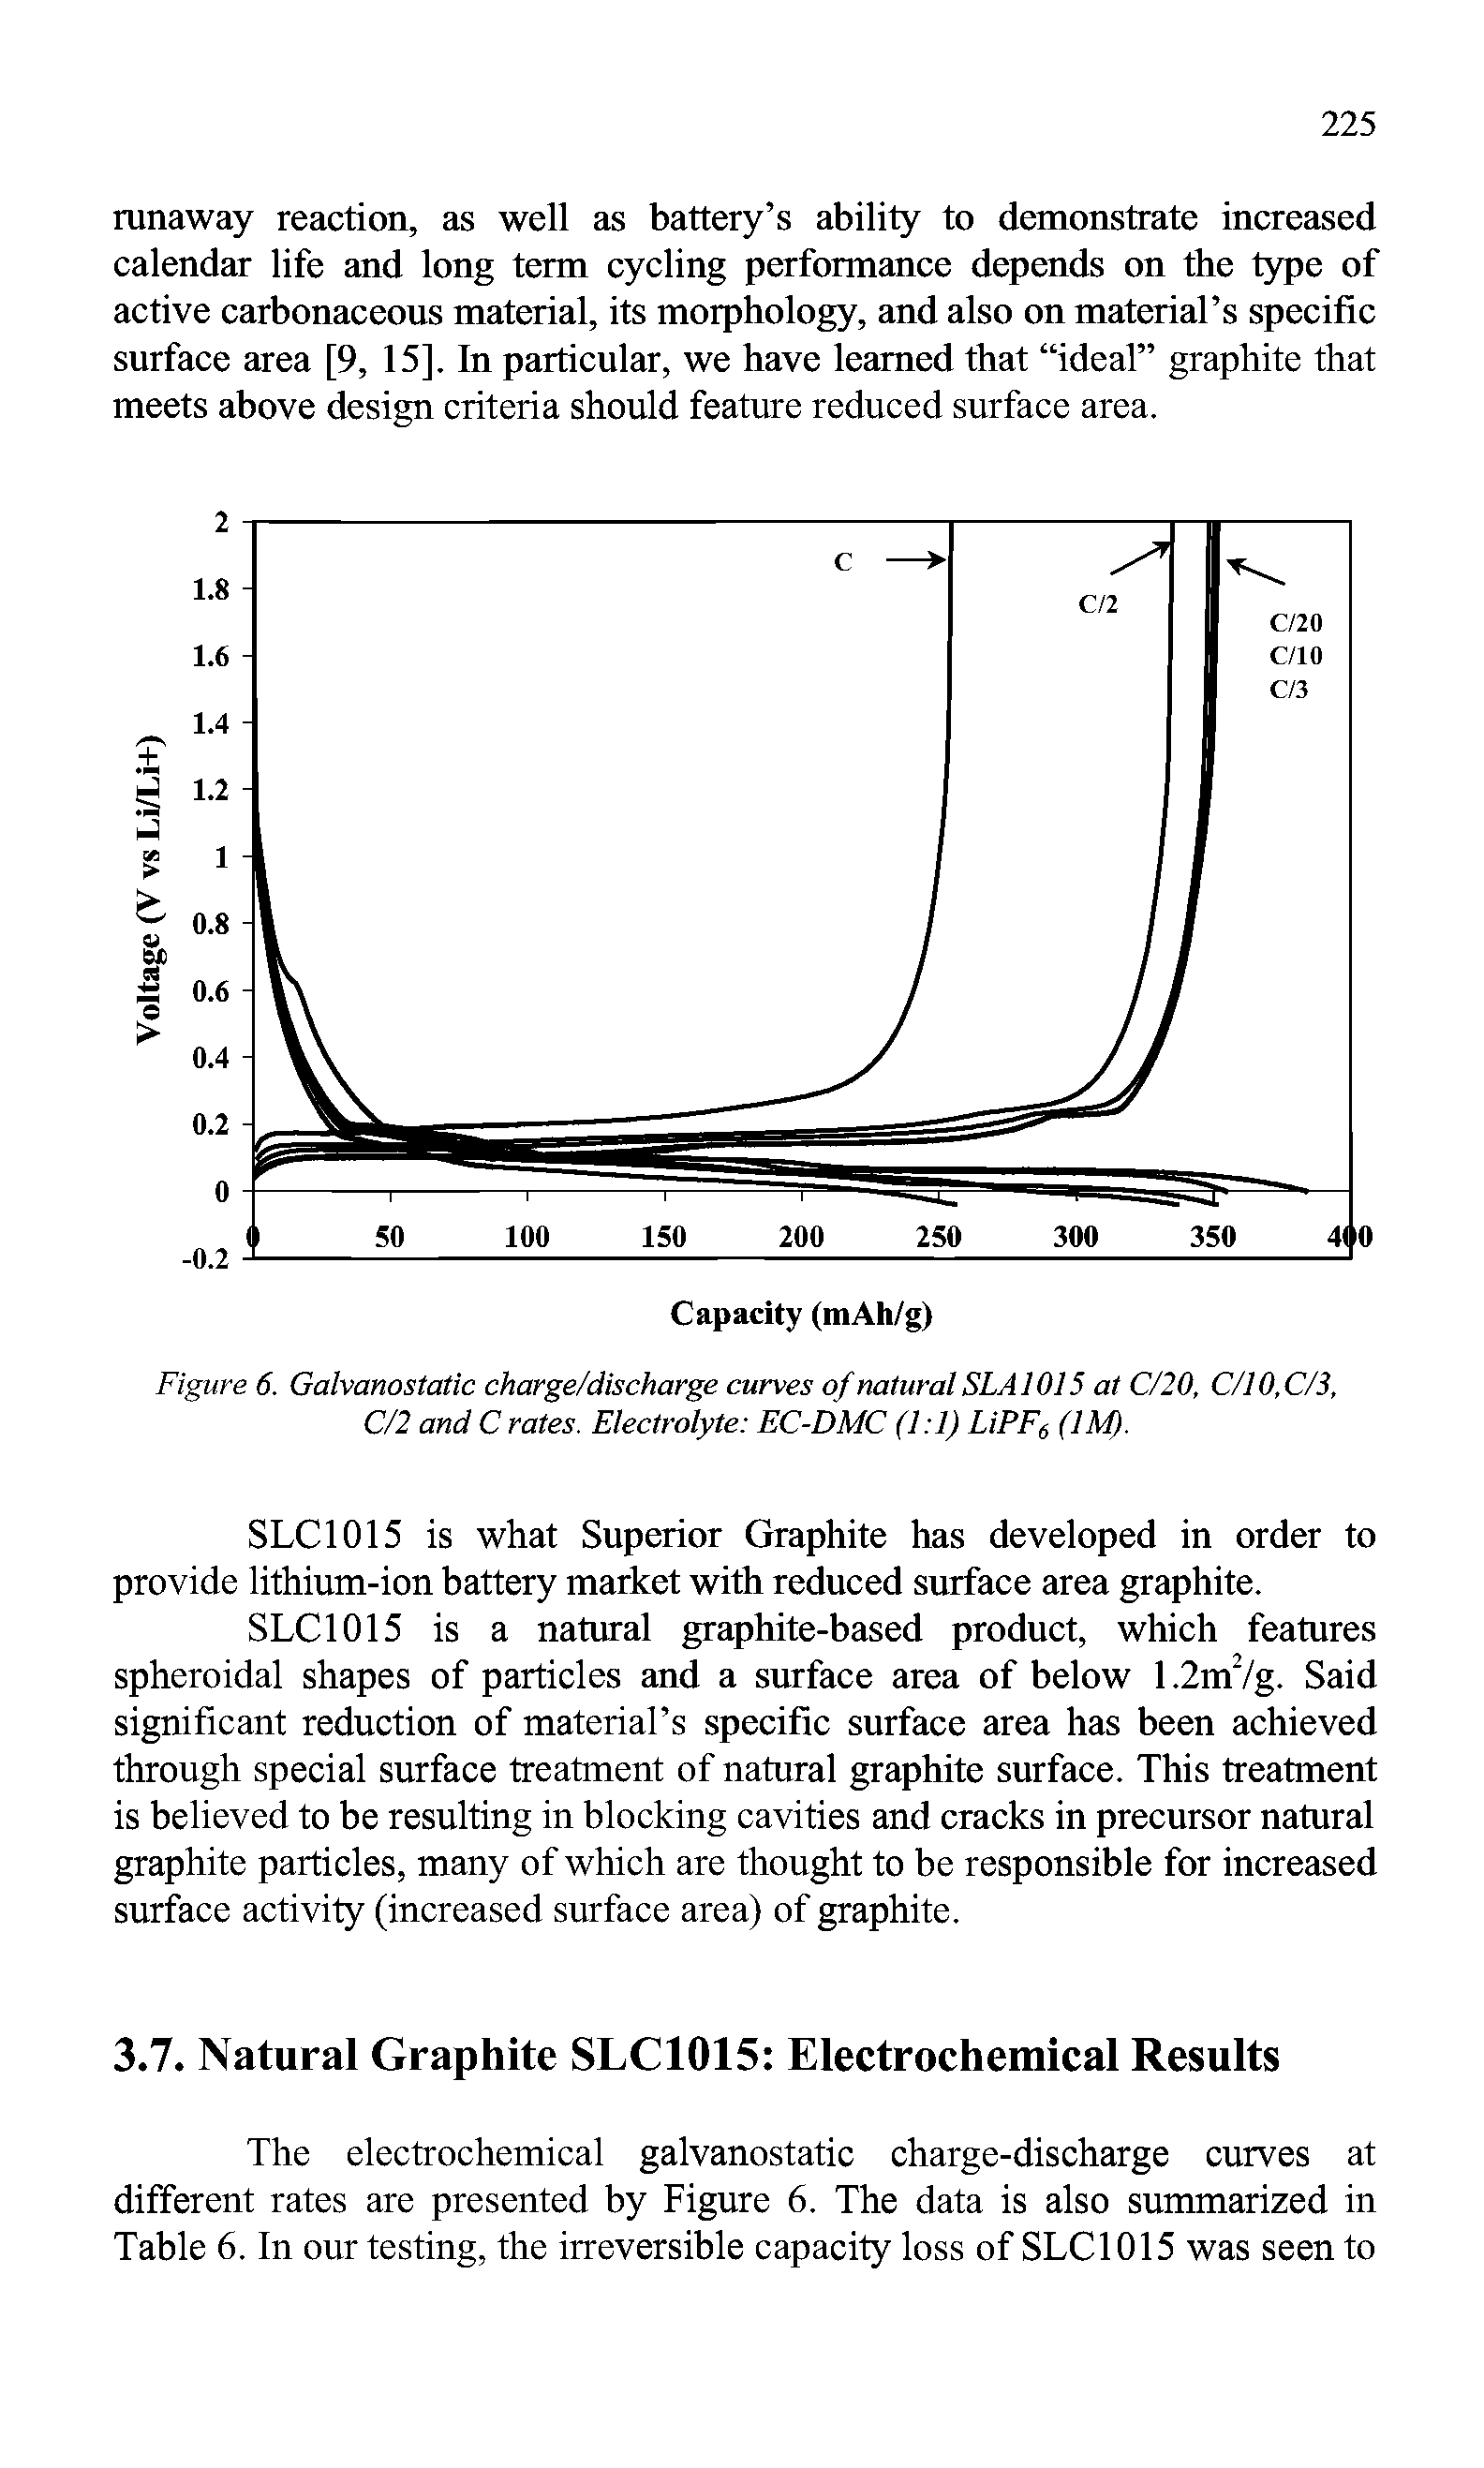 Figure 6. Galvanostatic charge/discharge curves of natural SLA 1015 at C/20, C/l 0, C/3, C/2 and C rates. Electrolyte EC-DMC (1 1) LiPF6 (1M).